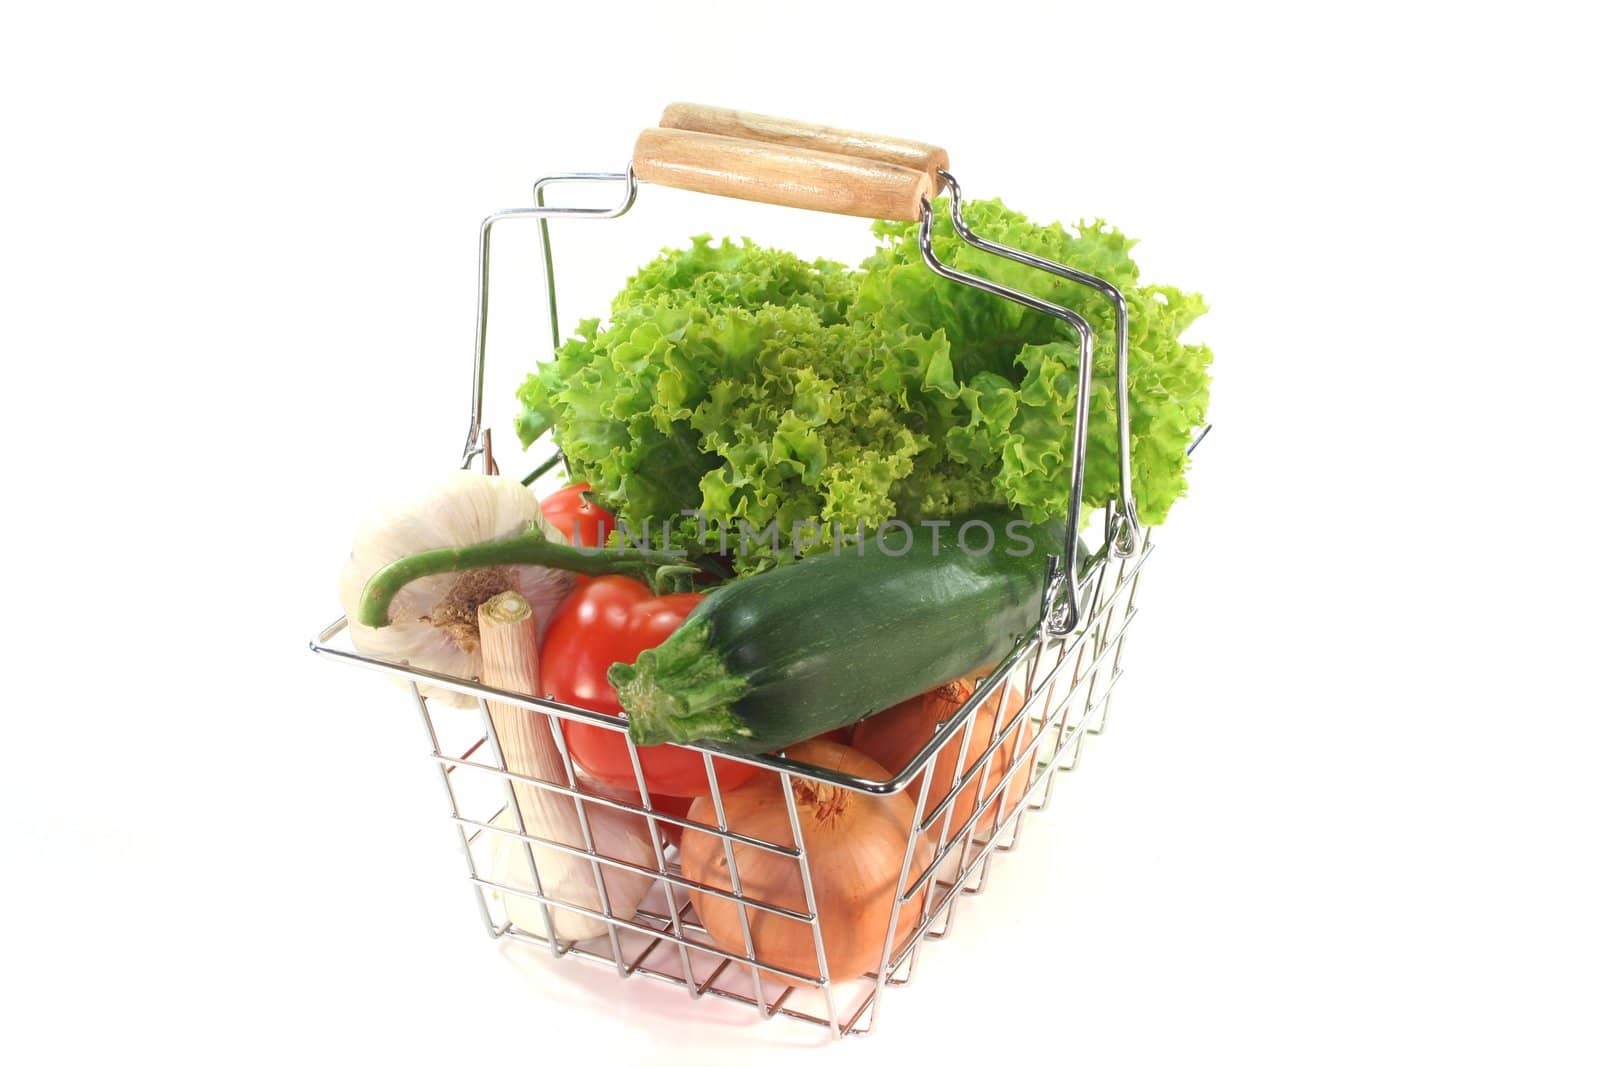 Colorful mixture of vegetables in the Shopping basket on a white background